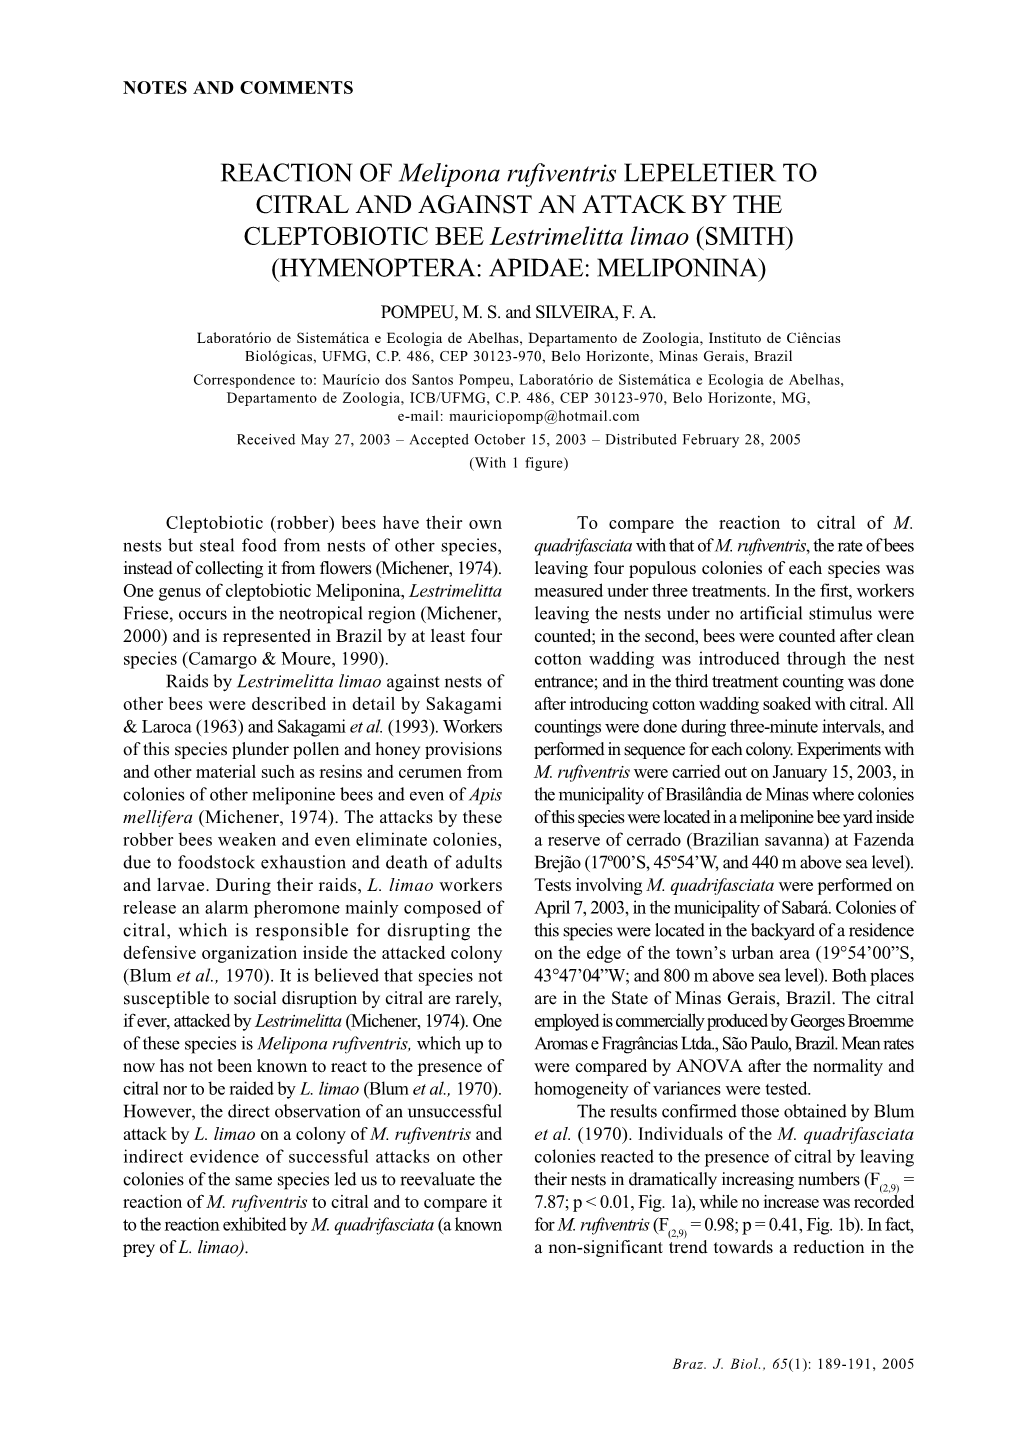 REACTION of Melipona Rufiventris LEPELETIER to CITRAL and AGAINST an ATTACK by the CLEPTOBIOTIC BEE Lestrimelitta Limao (SMITH) (HYMENOPTERA: APIDAE: MELIPONINA)